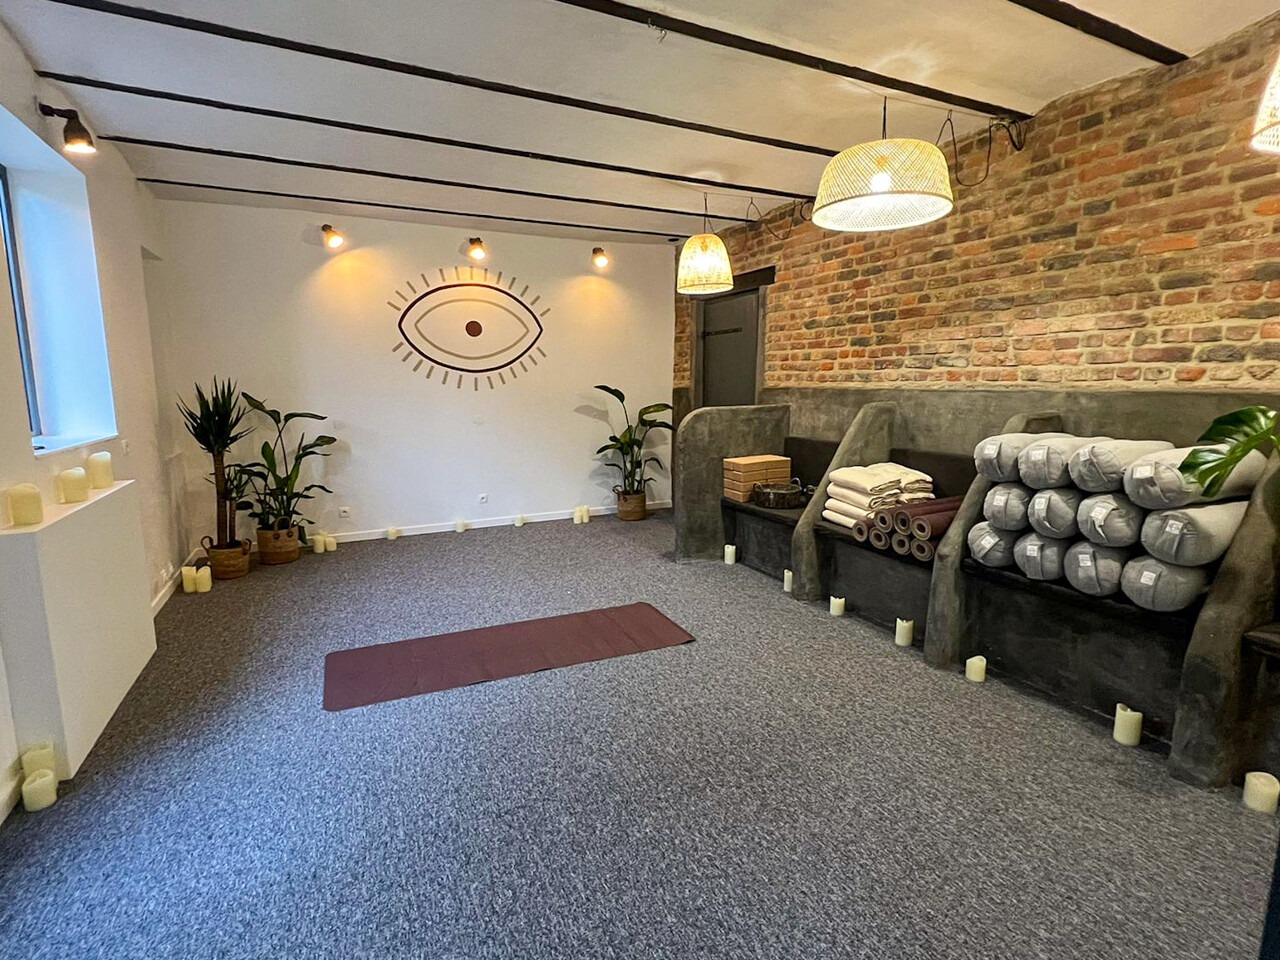 A yoga studio and a wellness boutique are opening in